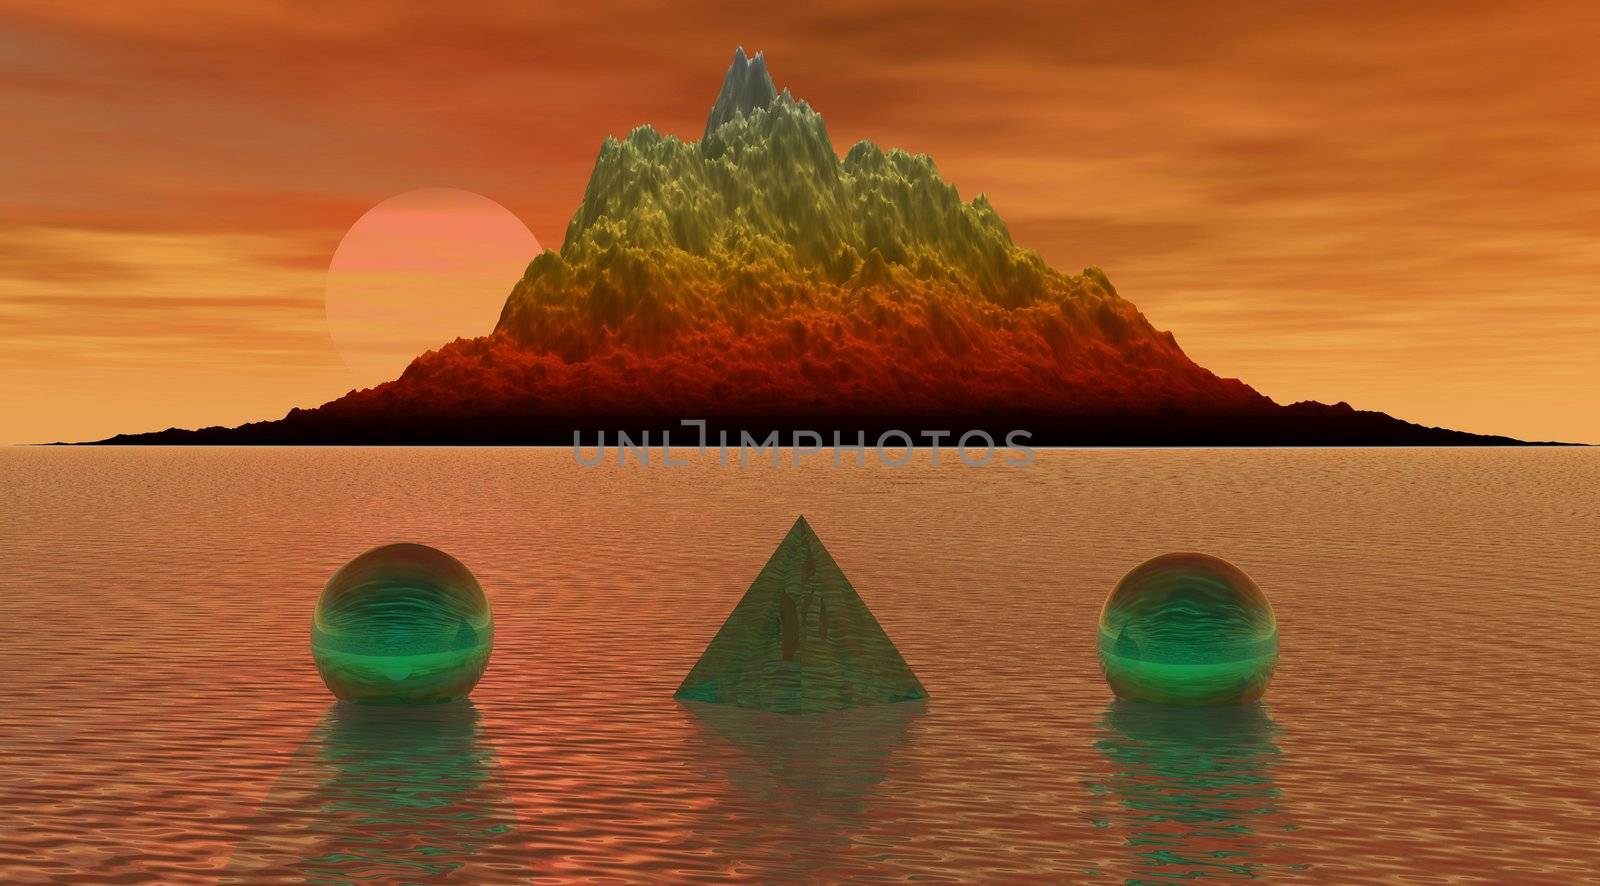 Mountain at the edge of the water and on the water pyramid and balls